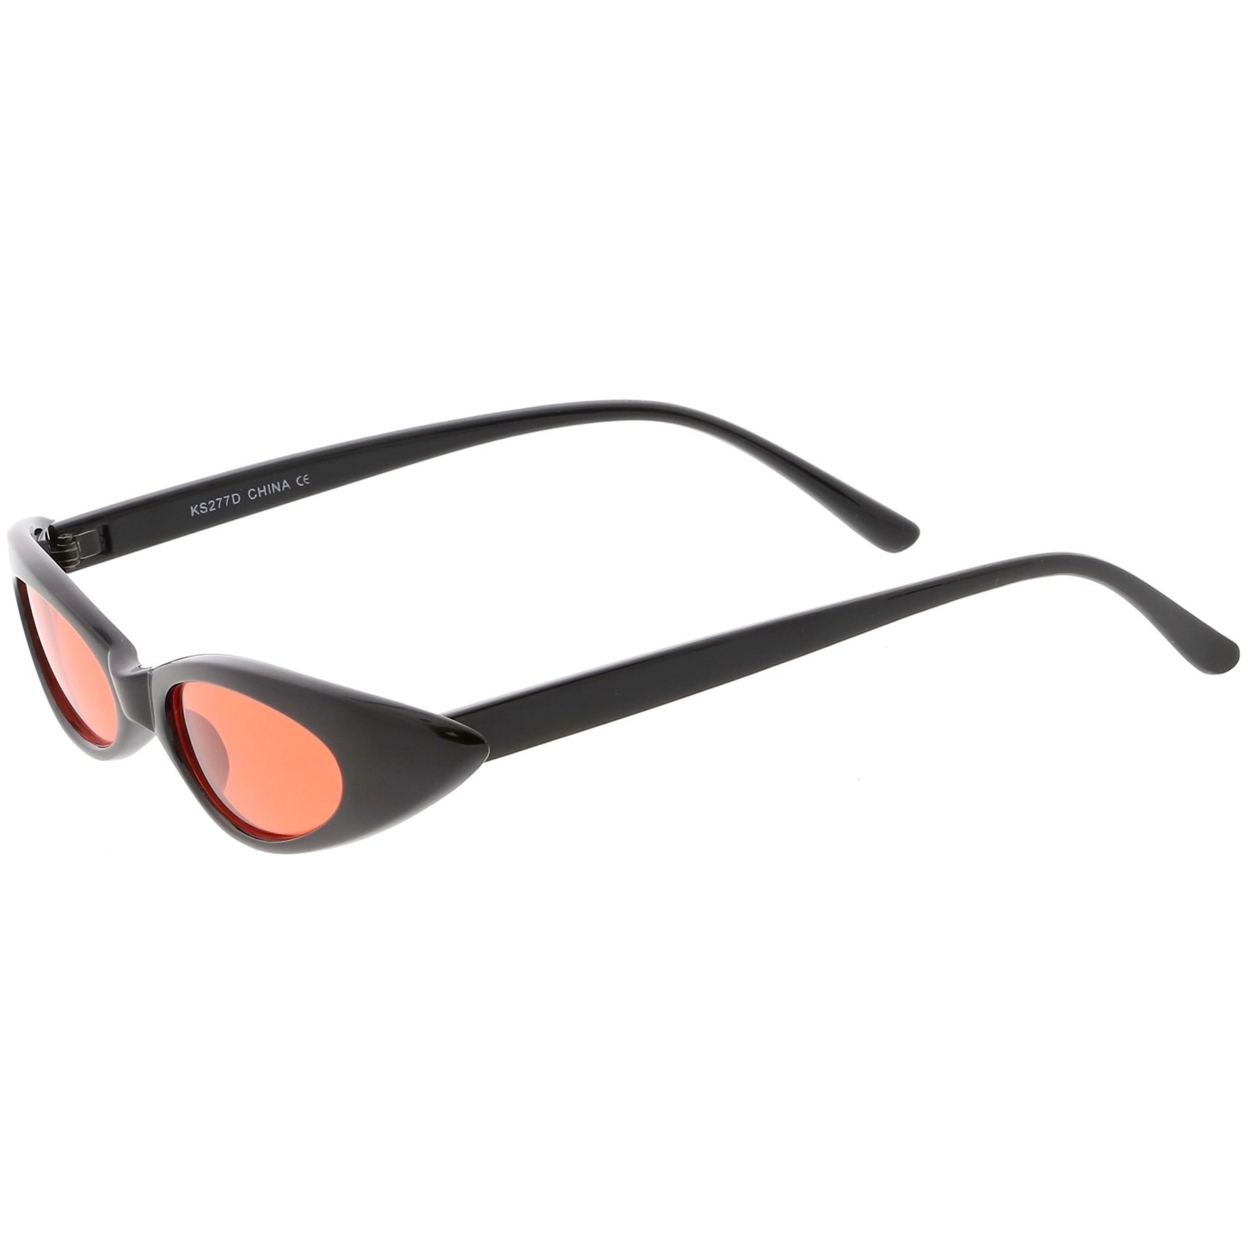 Ultra Thin Extreme Oval Sunglasses Color Tinted Lens 47mm - Black / Red